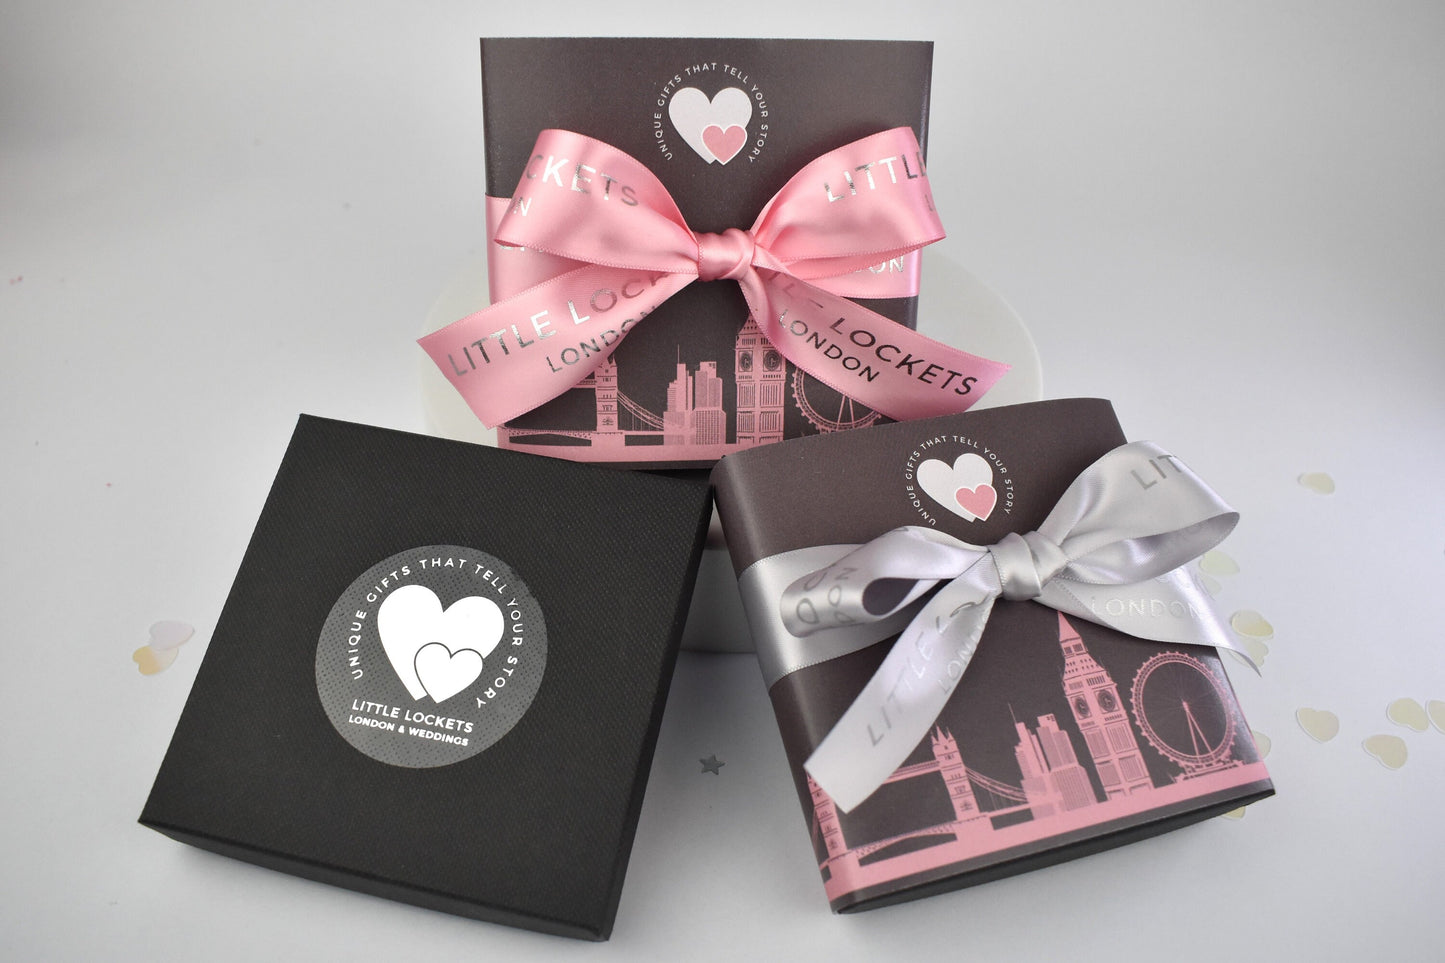 Your gift will arrive in a branded gift box, or upgrade to a London skyline wrap and your choice of ribbon tie